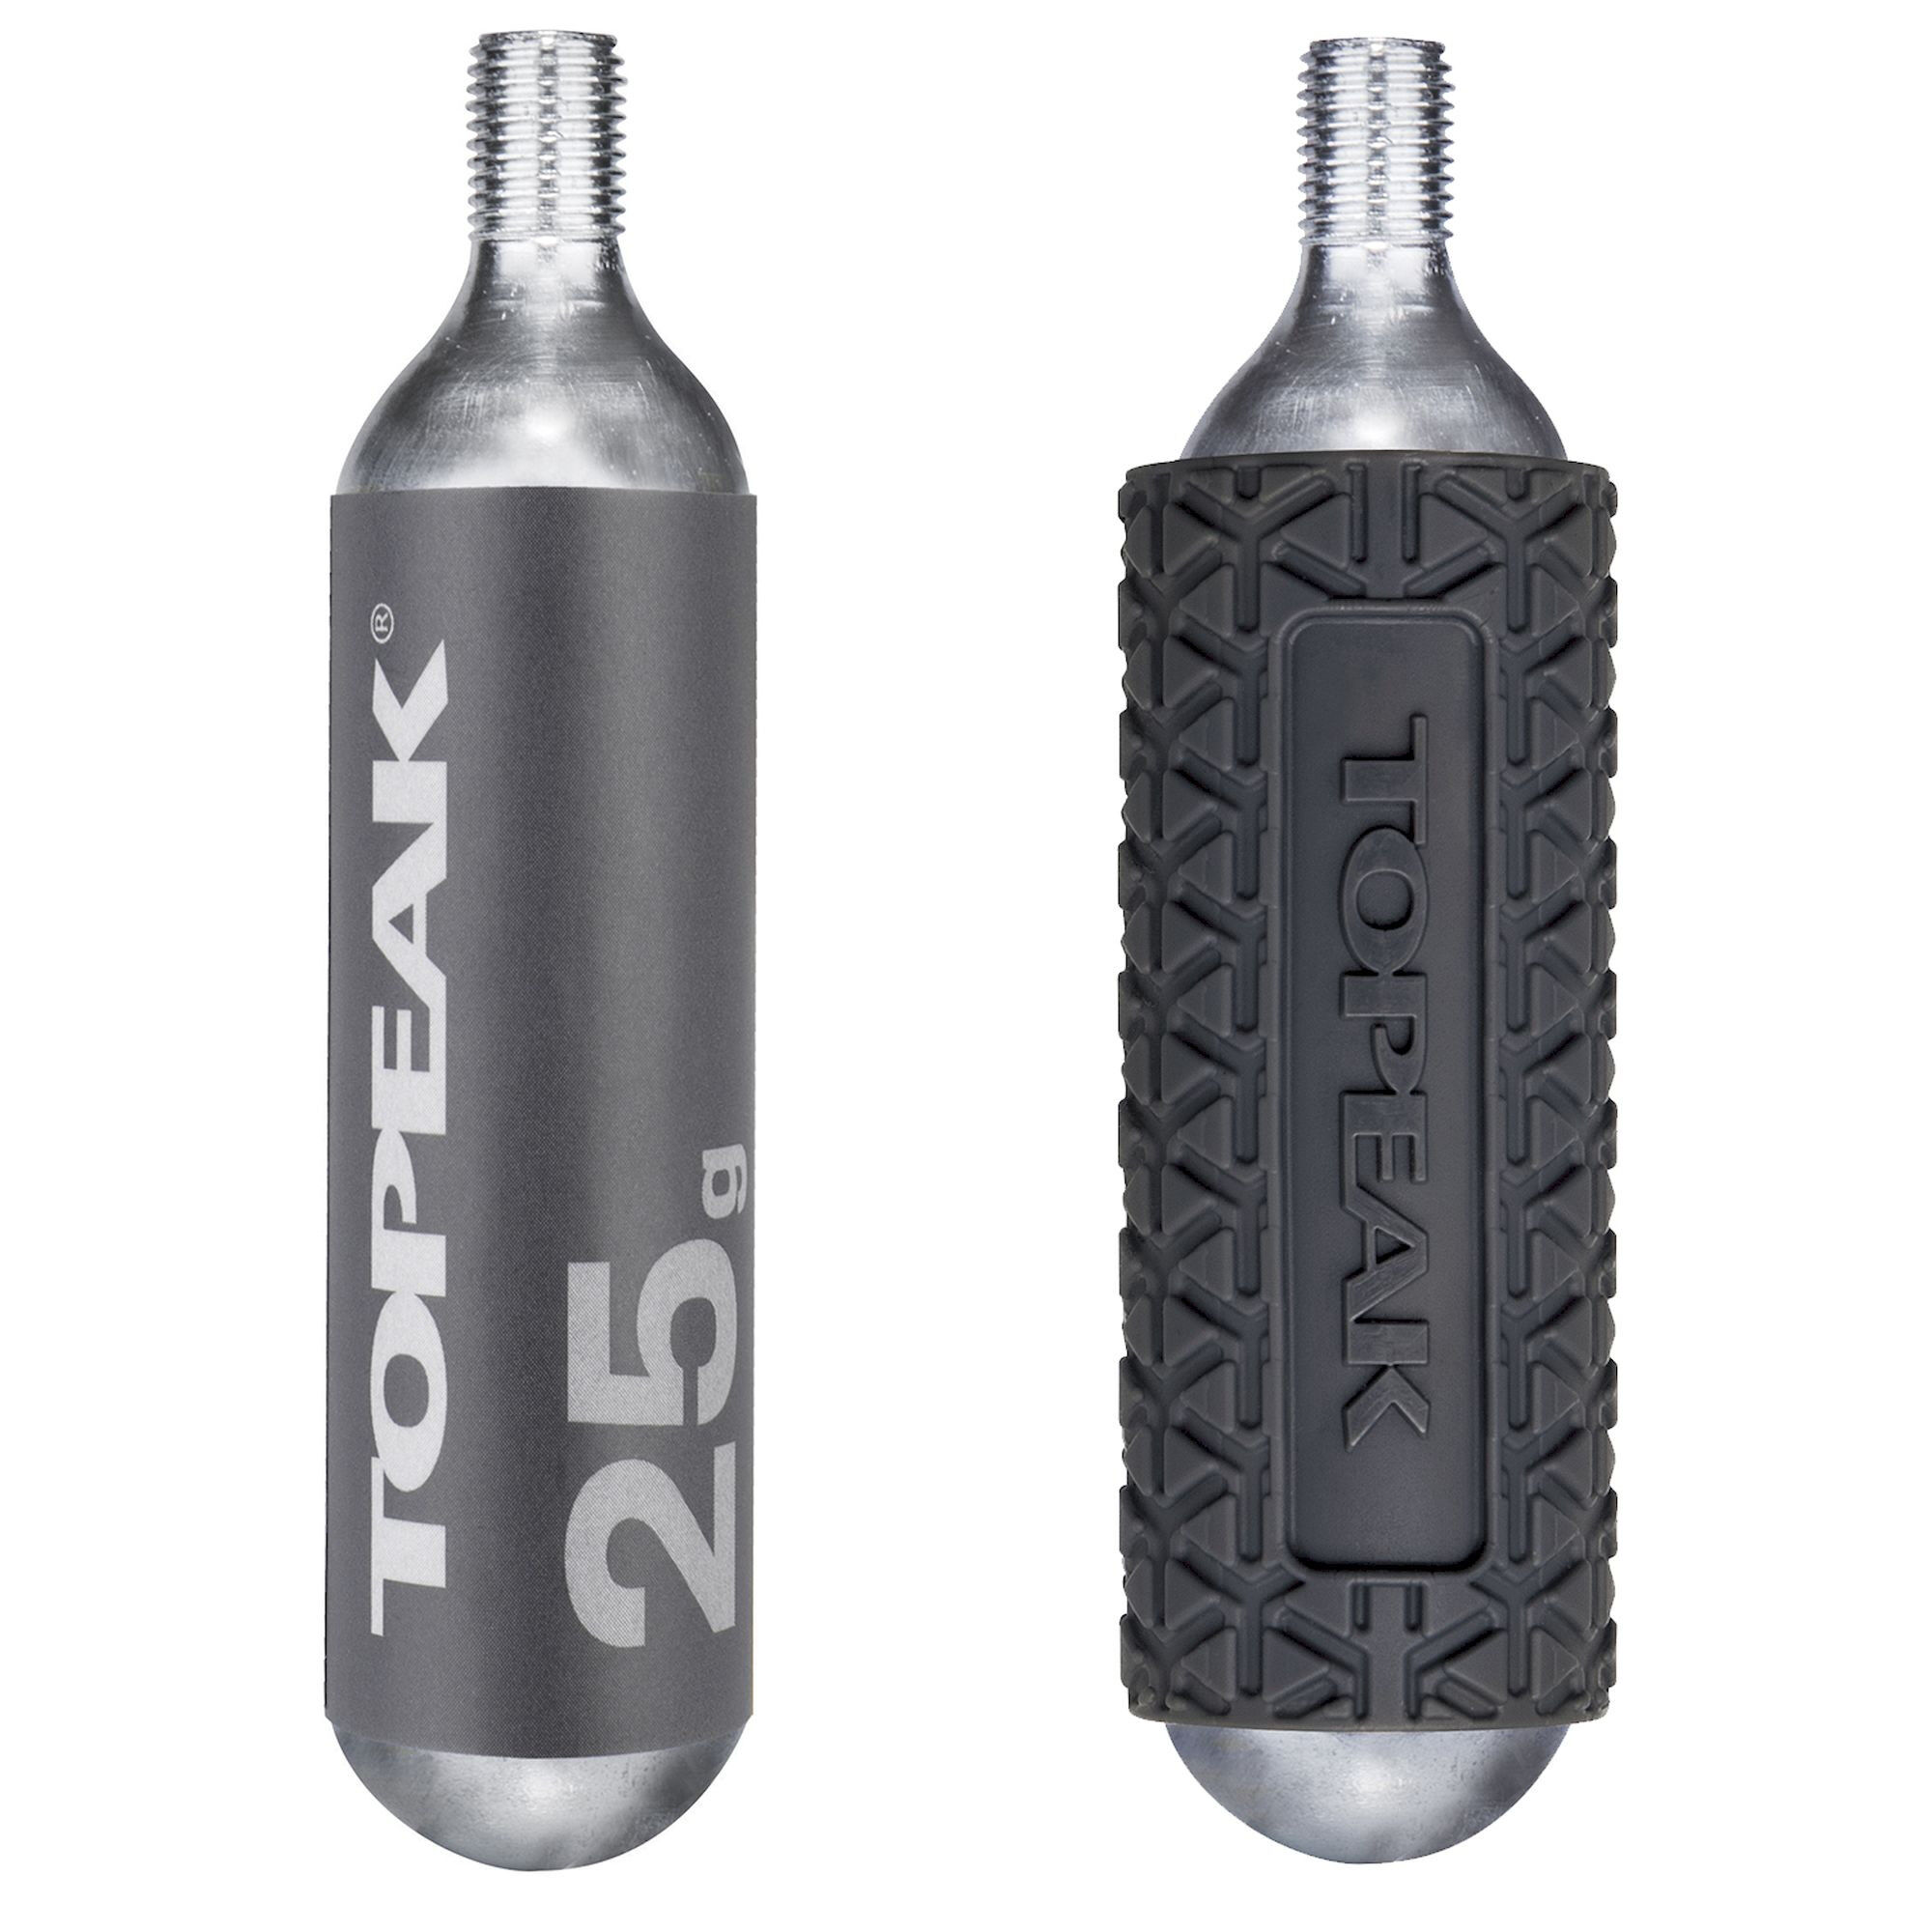 Topeak CO2 Cartridge 25g Threated (2 pieces w/ 1 cover) - Pompka CO2 | Hardloop